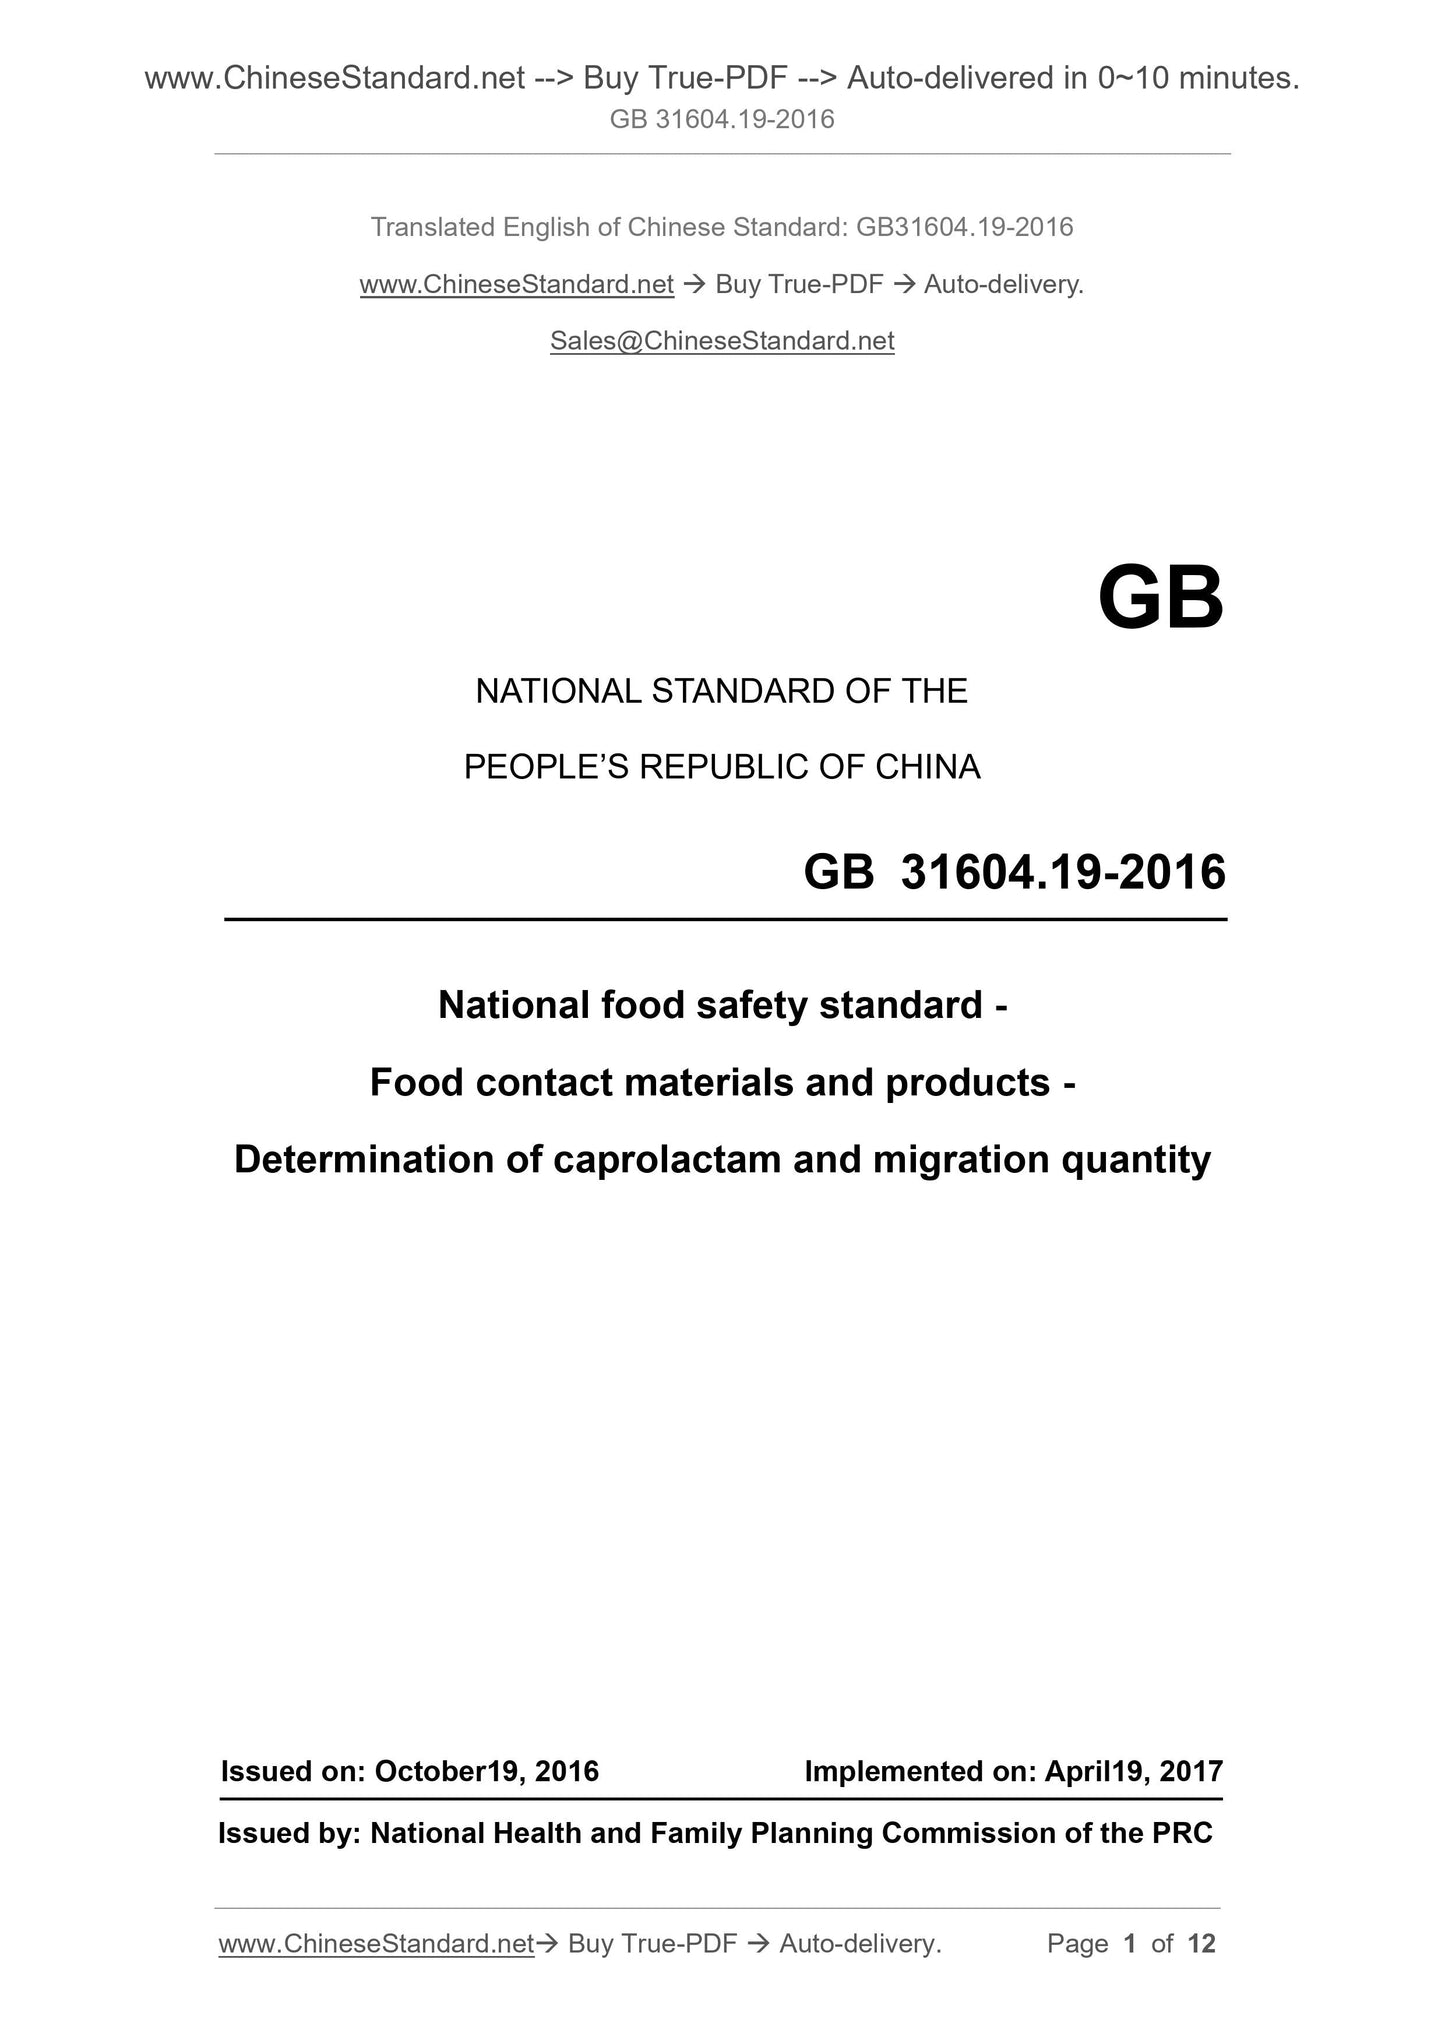 GB 31604.19-2016 Page 1